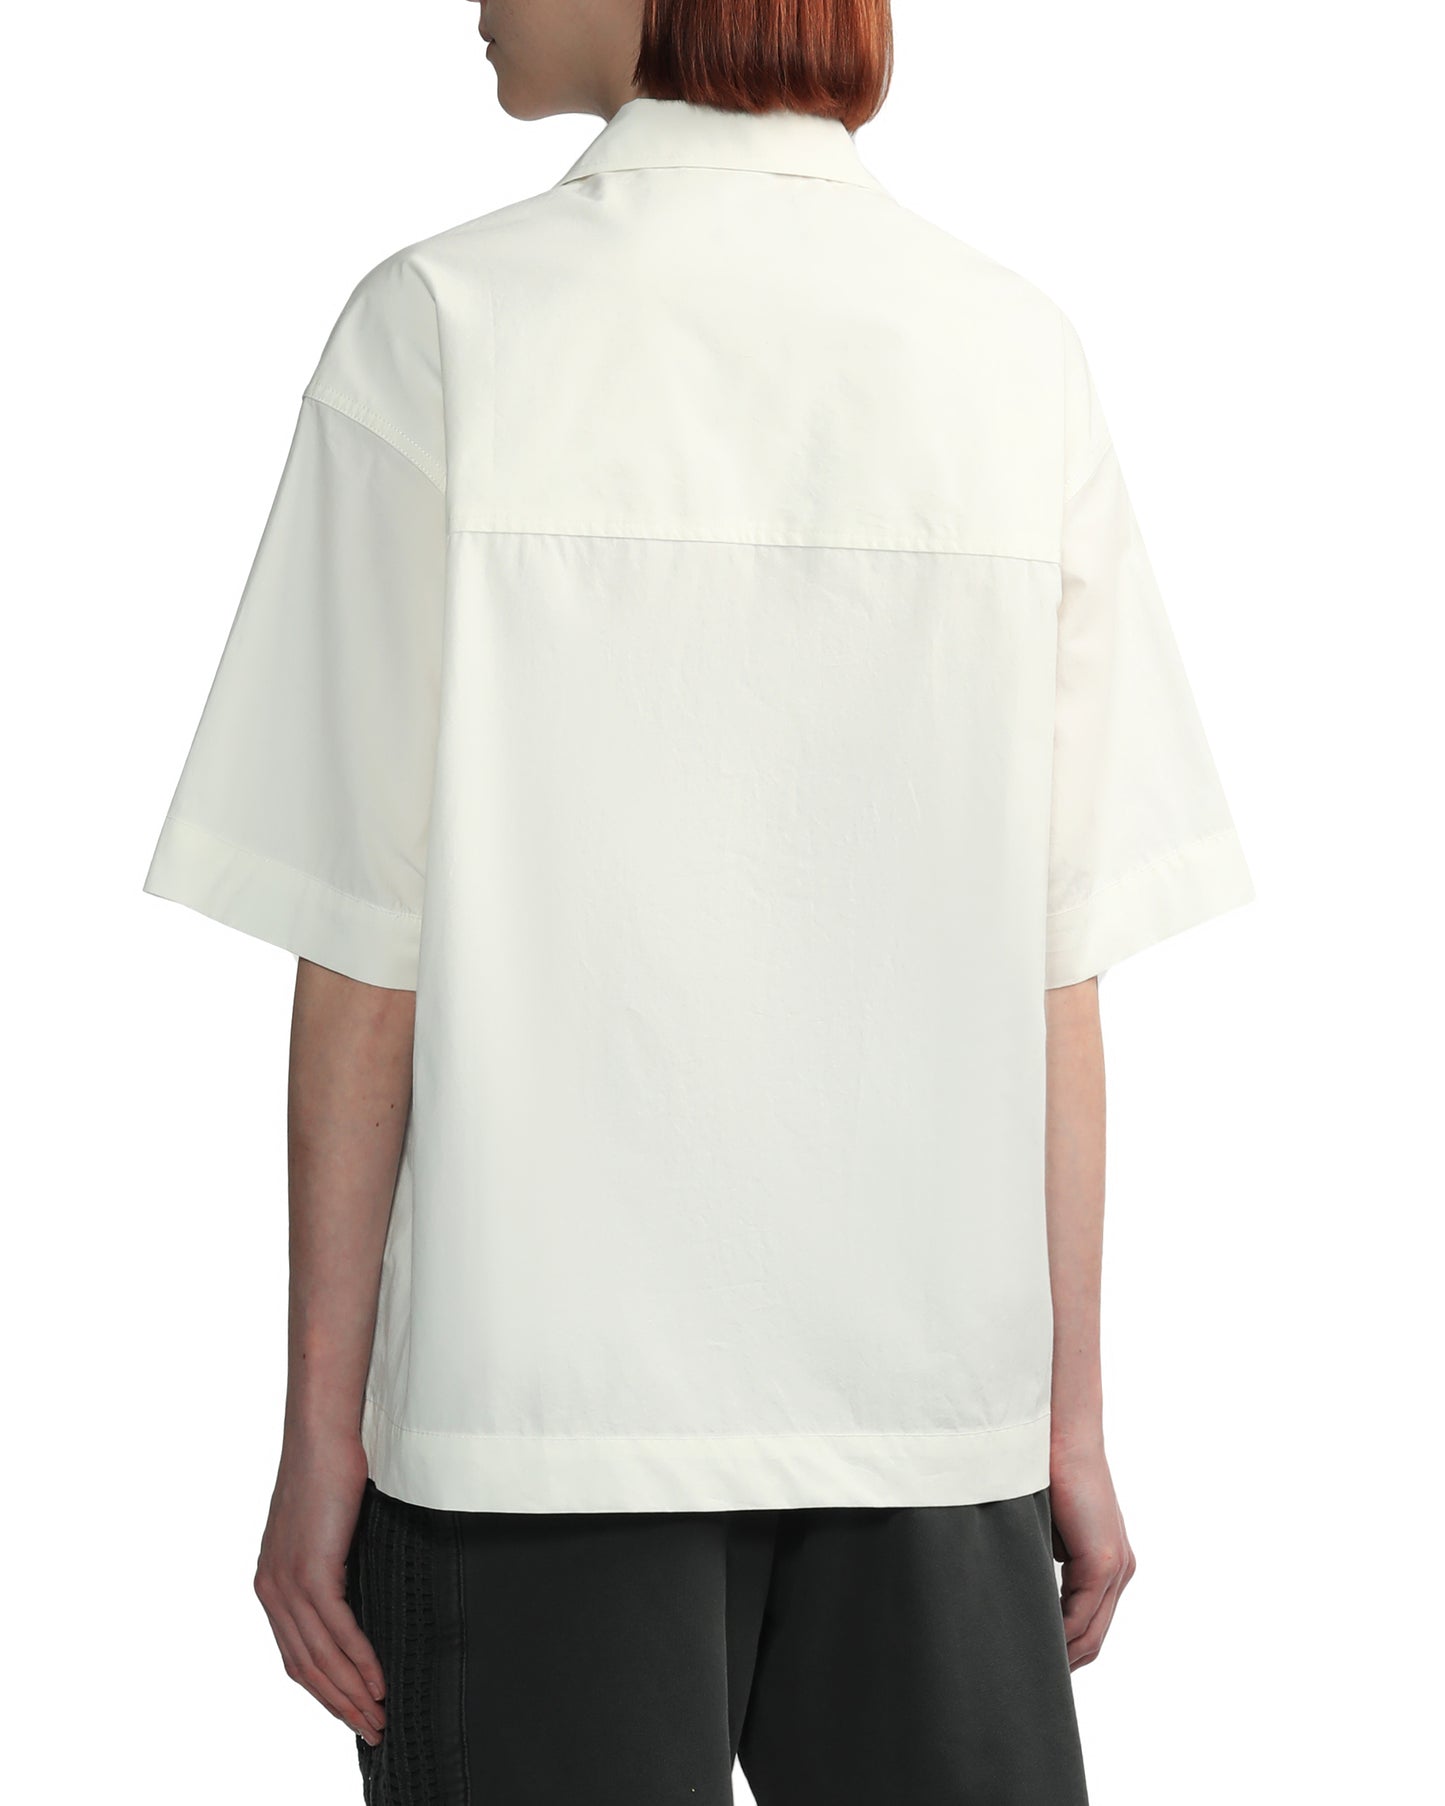 Men's Relaxed Fit Hawaii Shirt in White